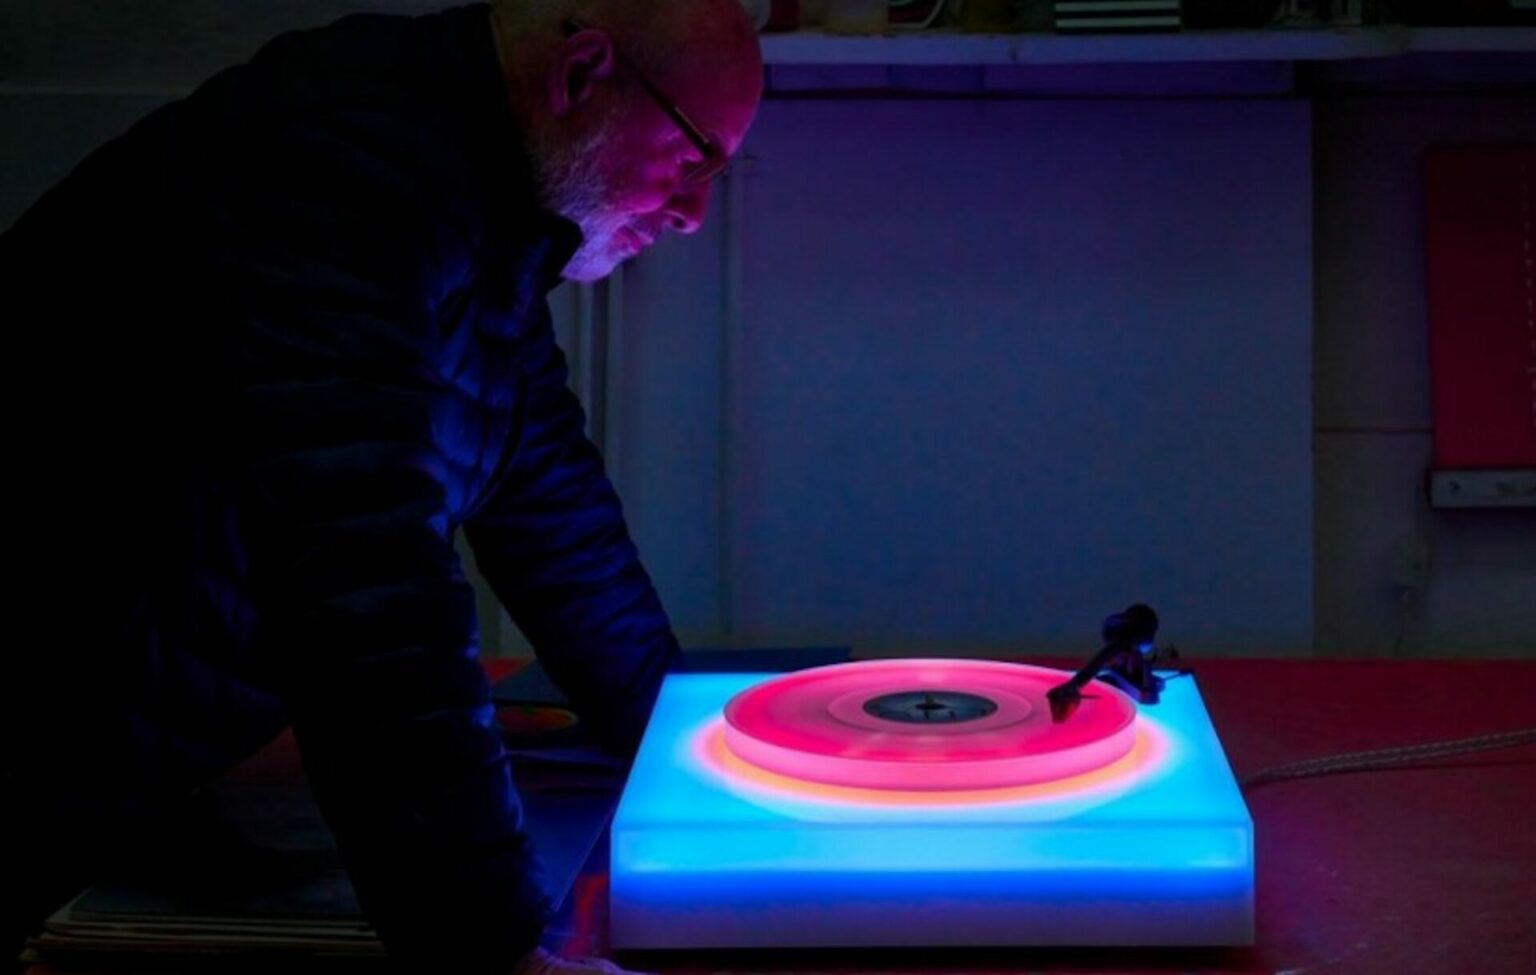 Brian Eno launches new colourchanging turntable